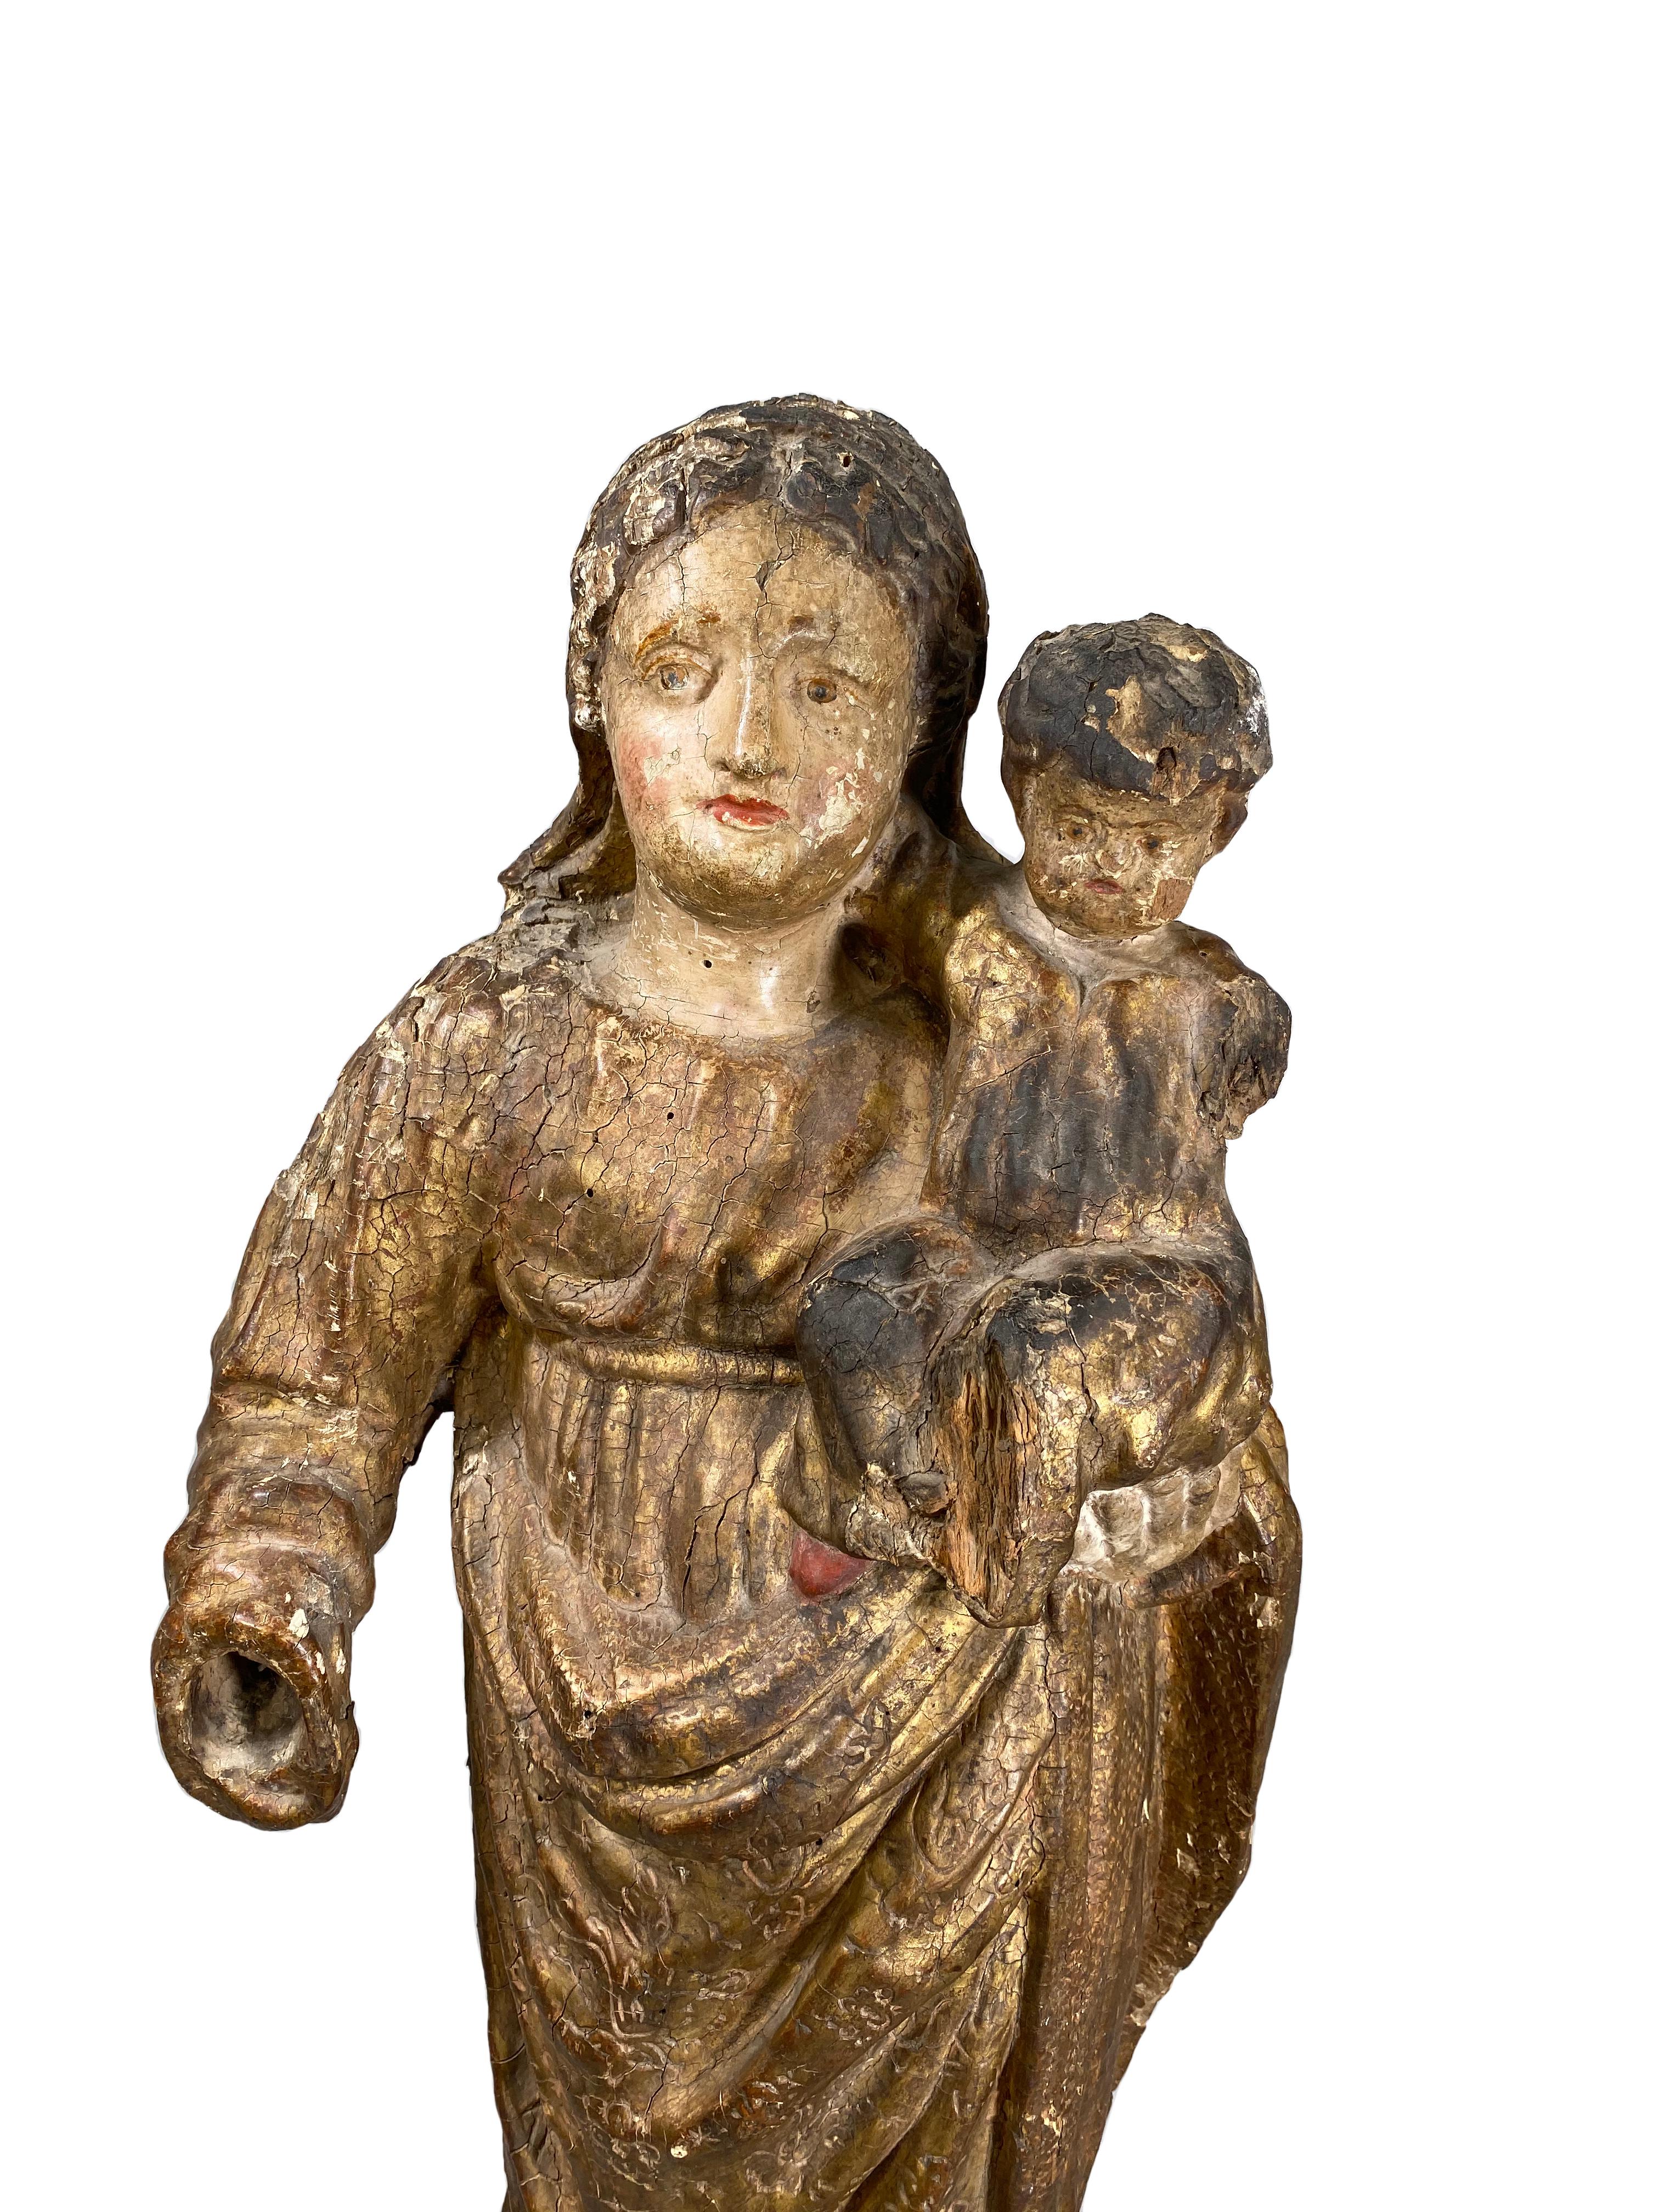 Statue of Mary and child is extremely unique in the sense that the back has been decorated, which was uncommon for the time period. From the south of France.